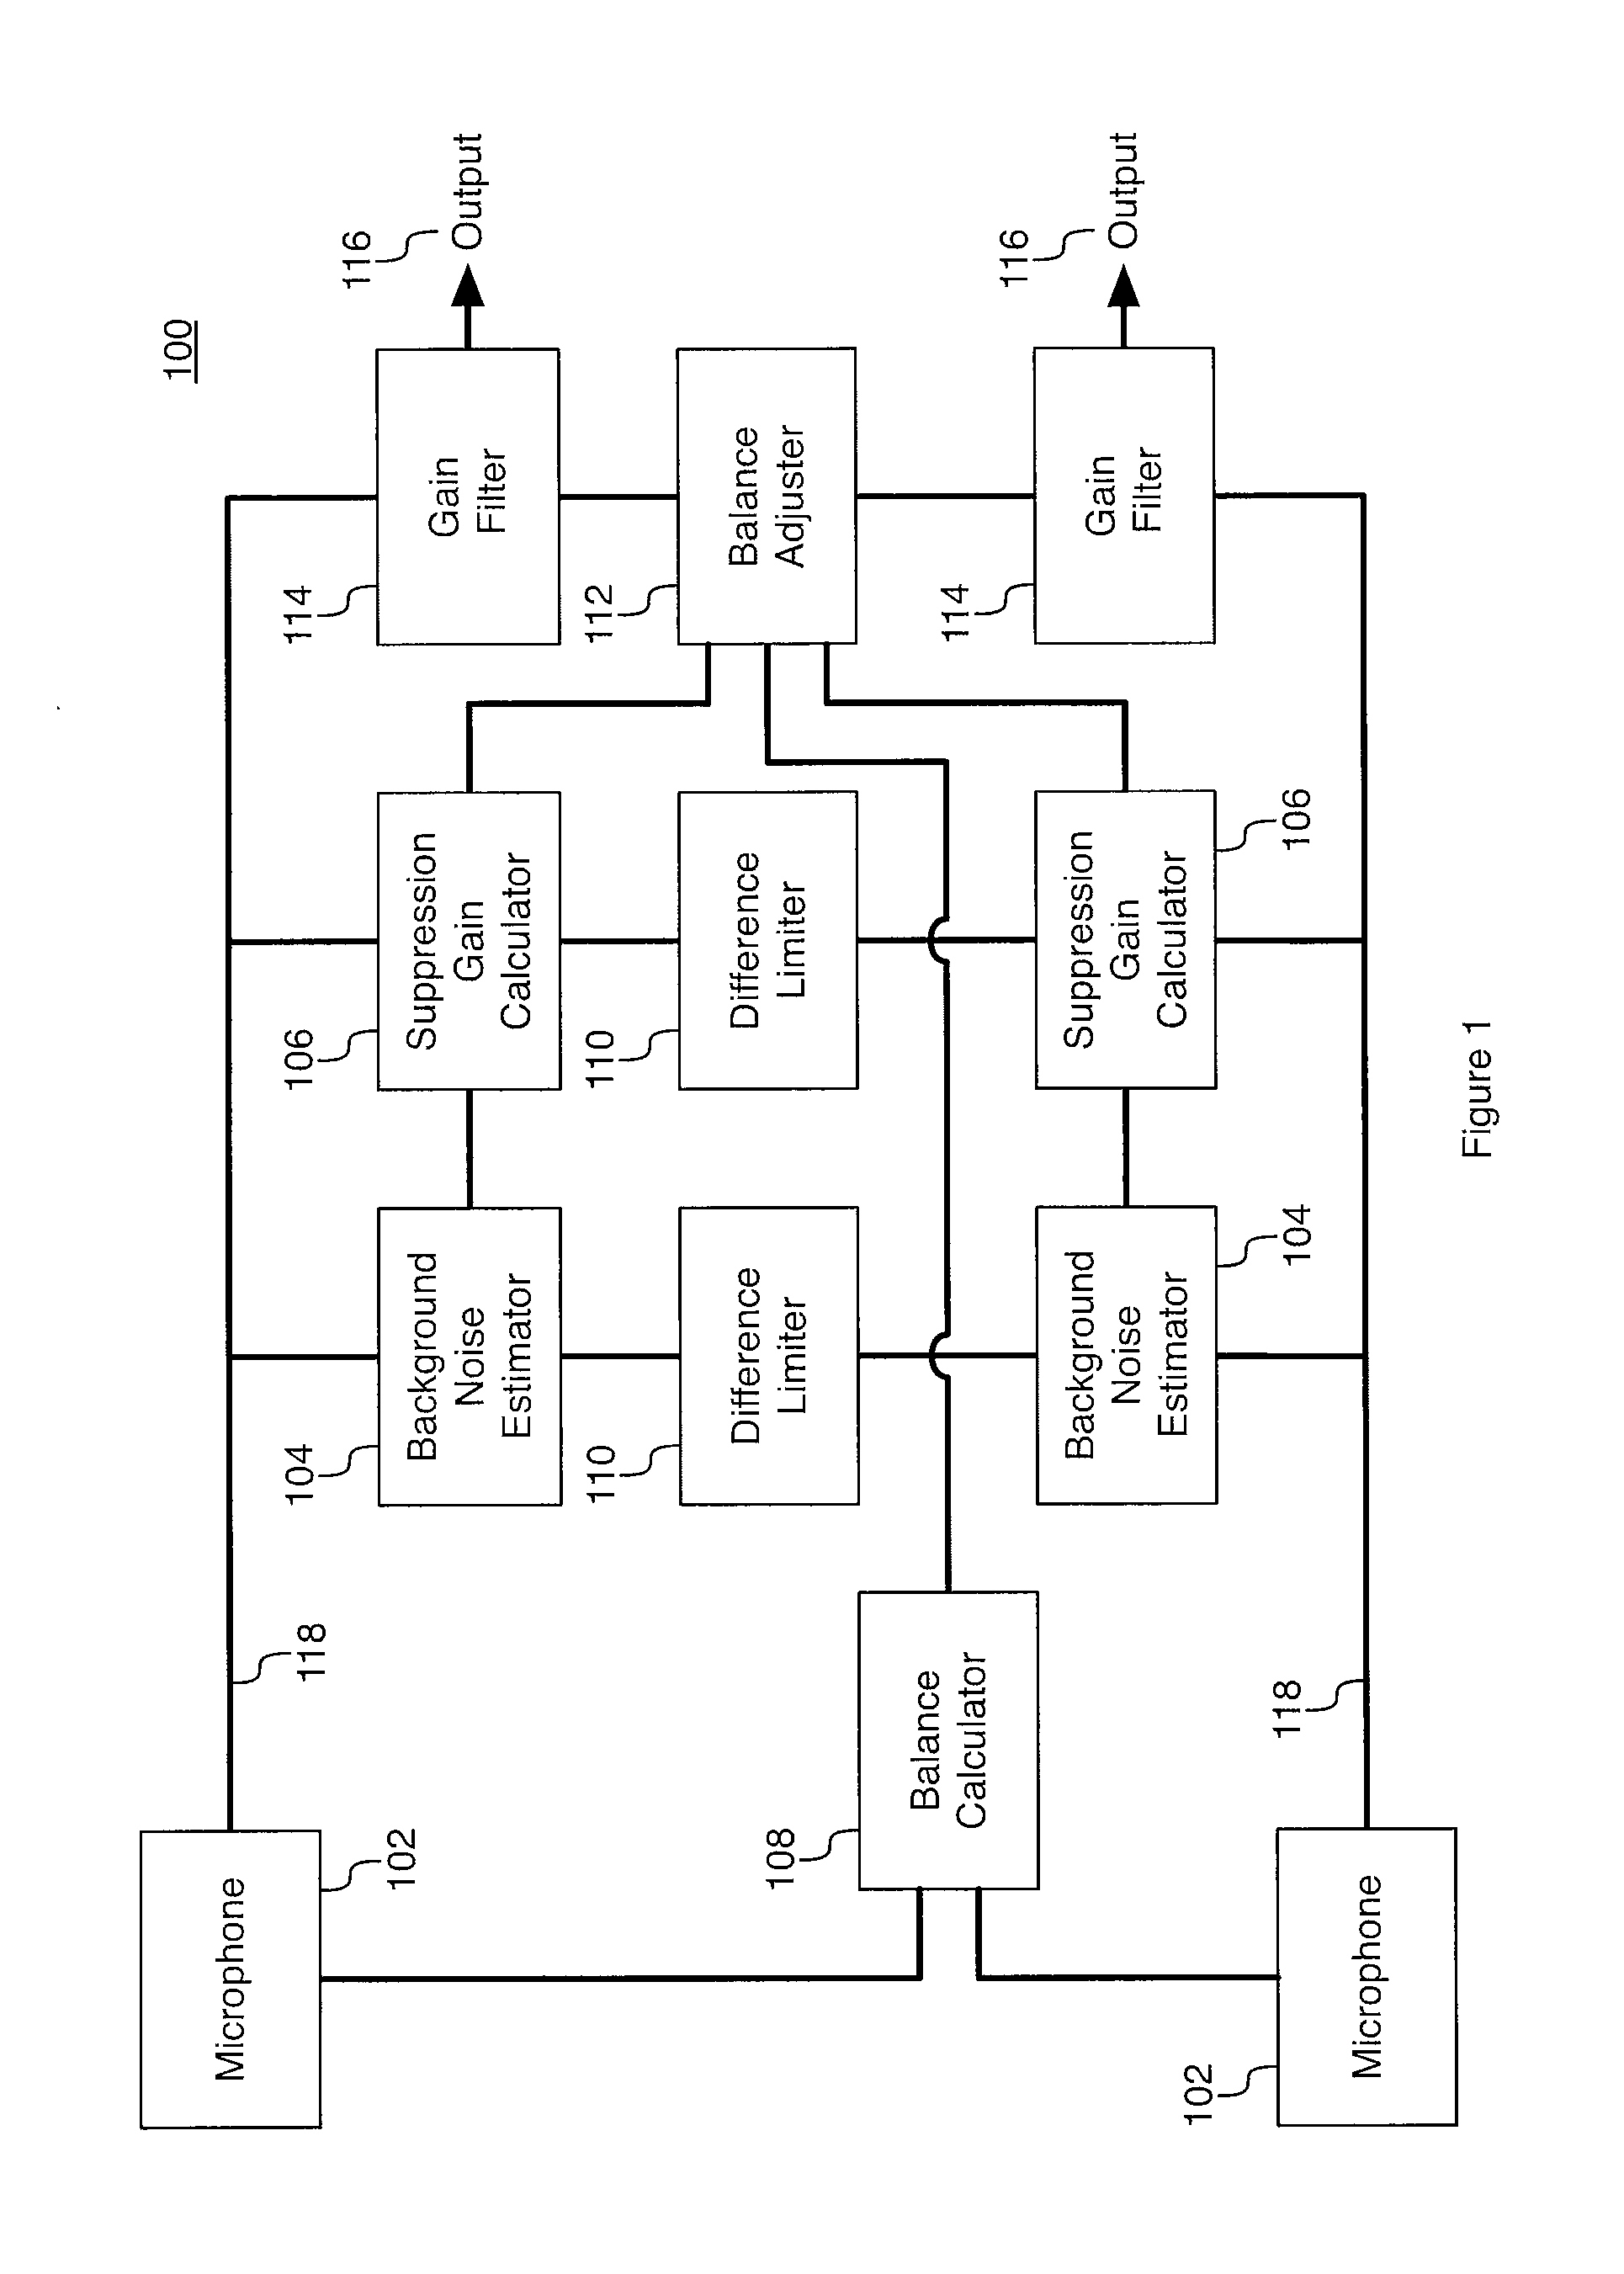 Sound field spatial stabilizer with spectral coherence compensation